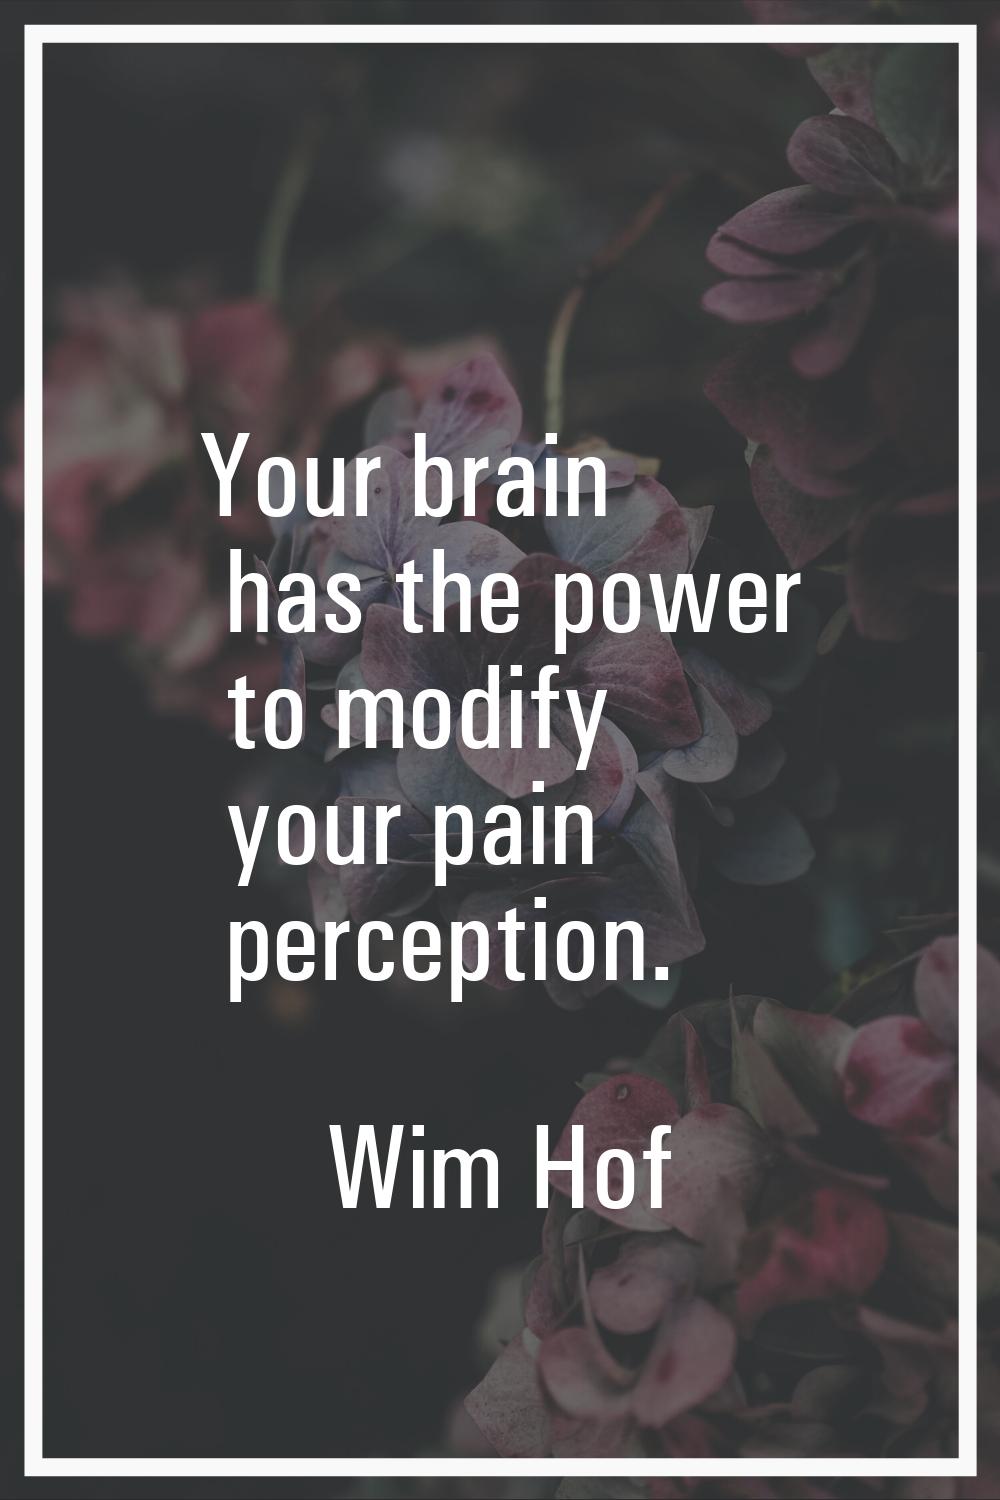 Your brain has the power to modify your pain perception.